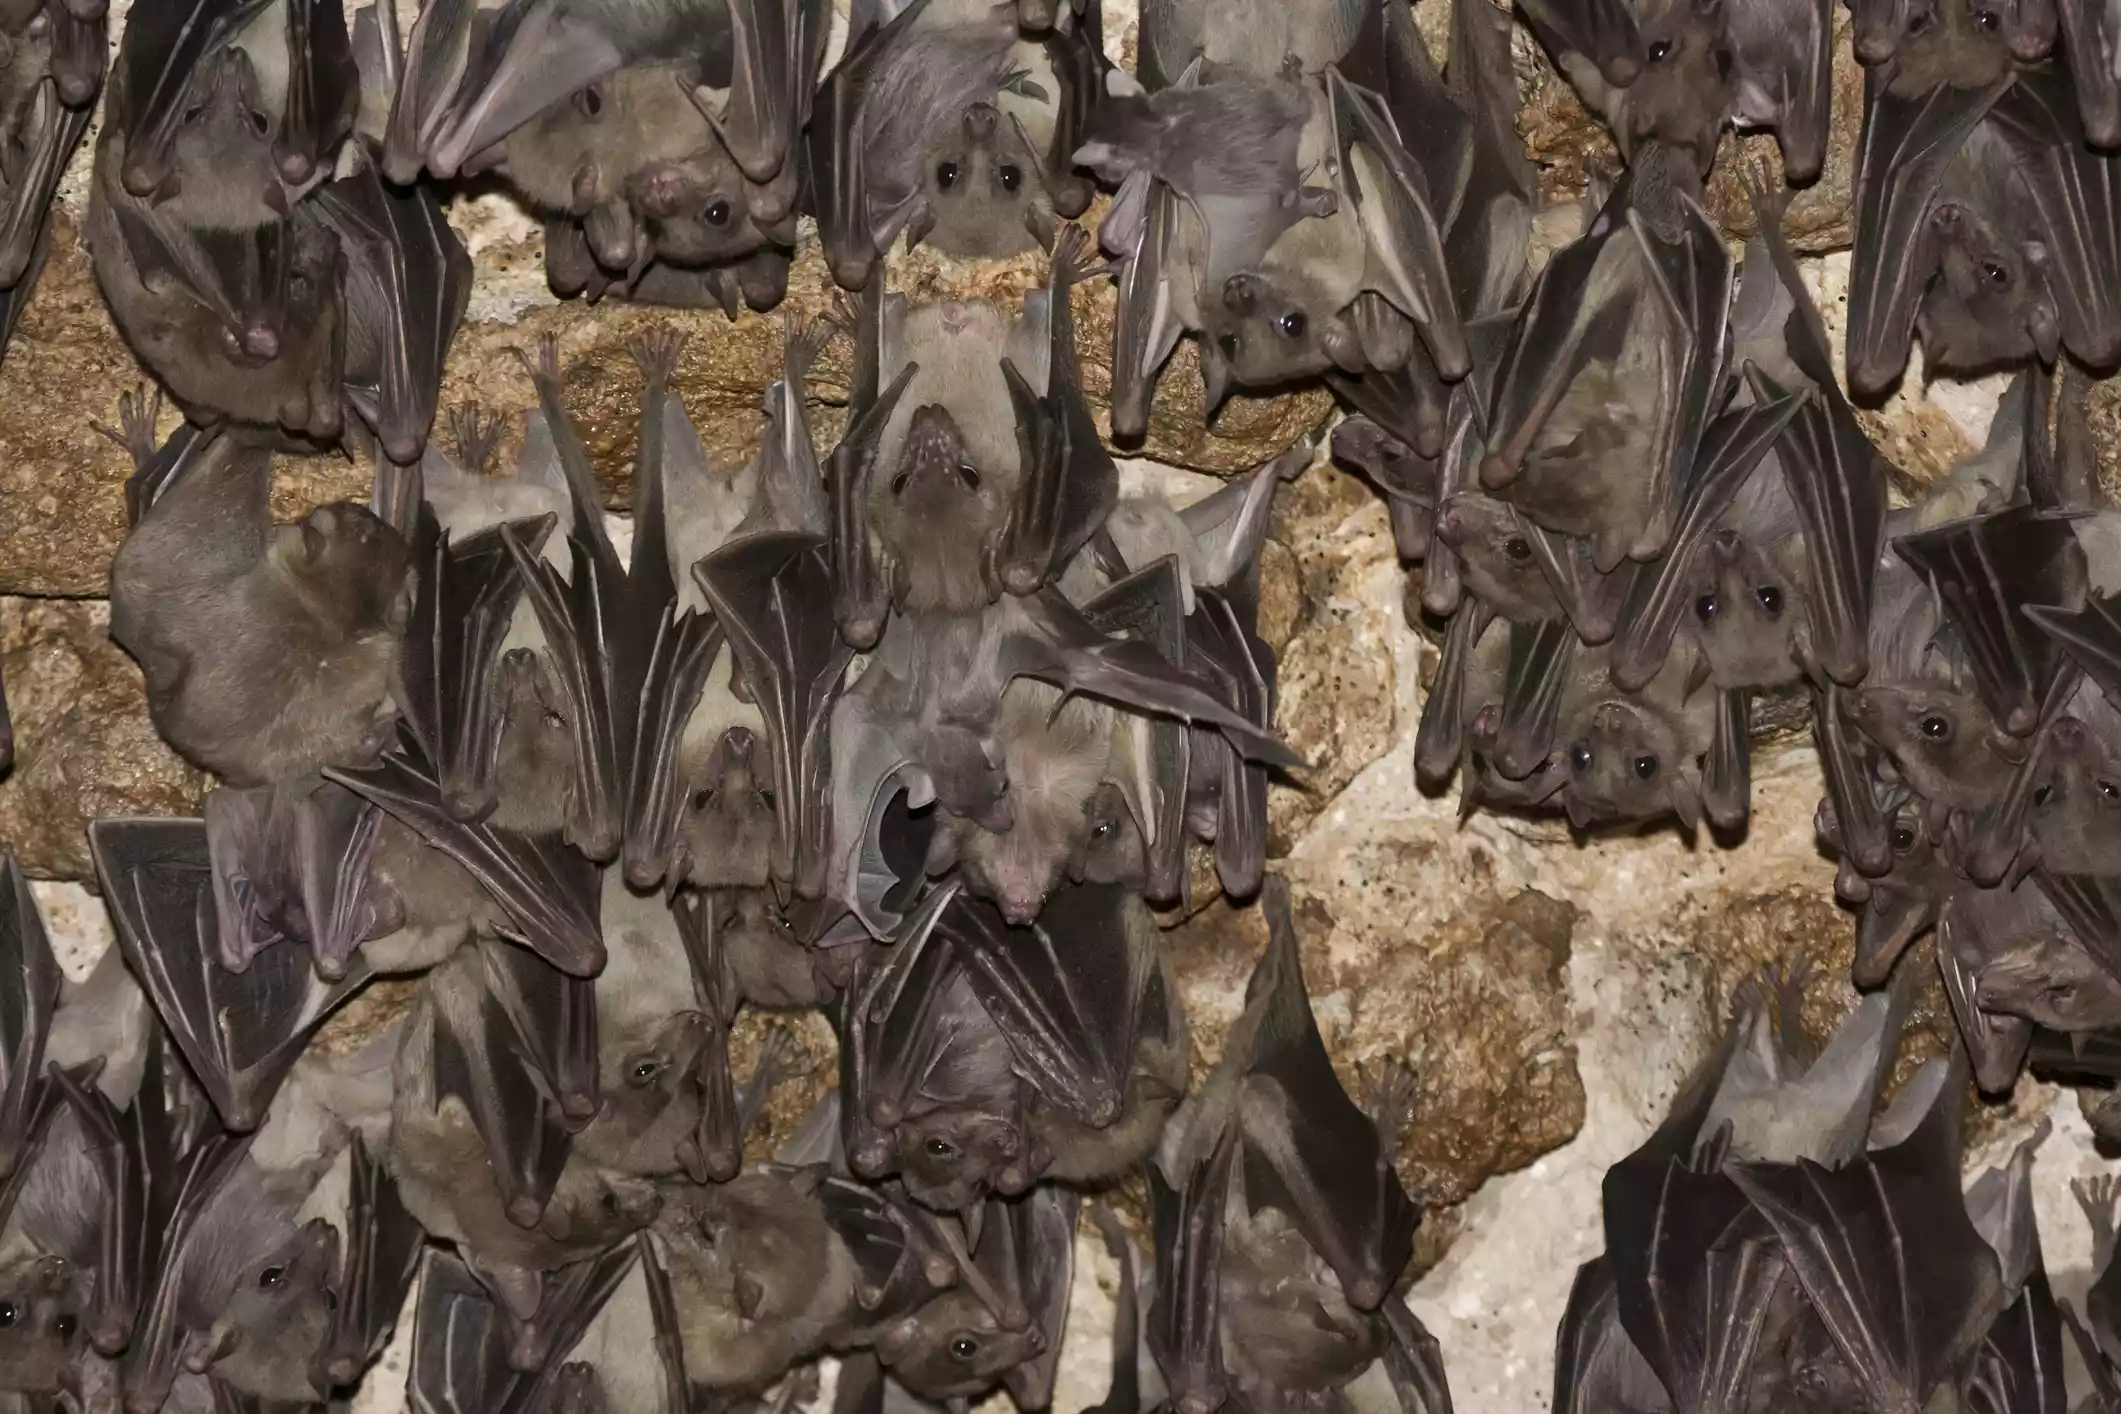 Egyptian rousette bats hanging in a large group at night